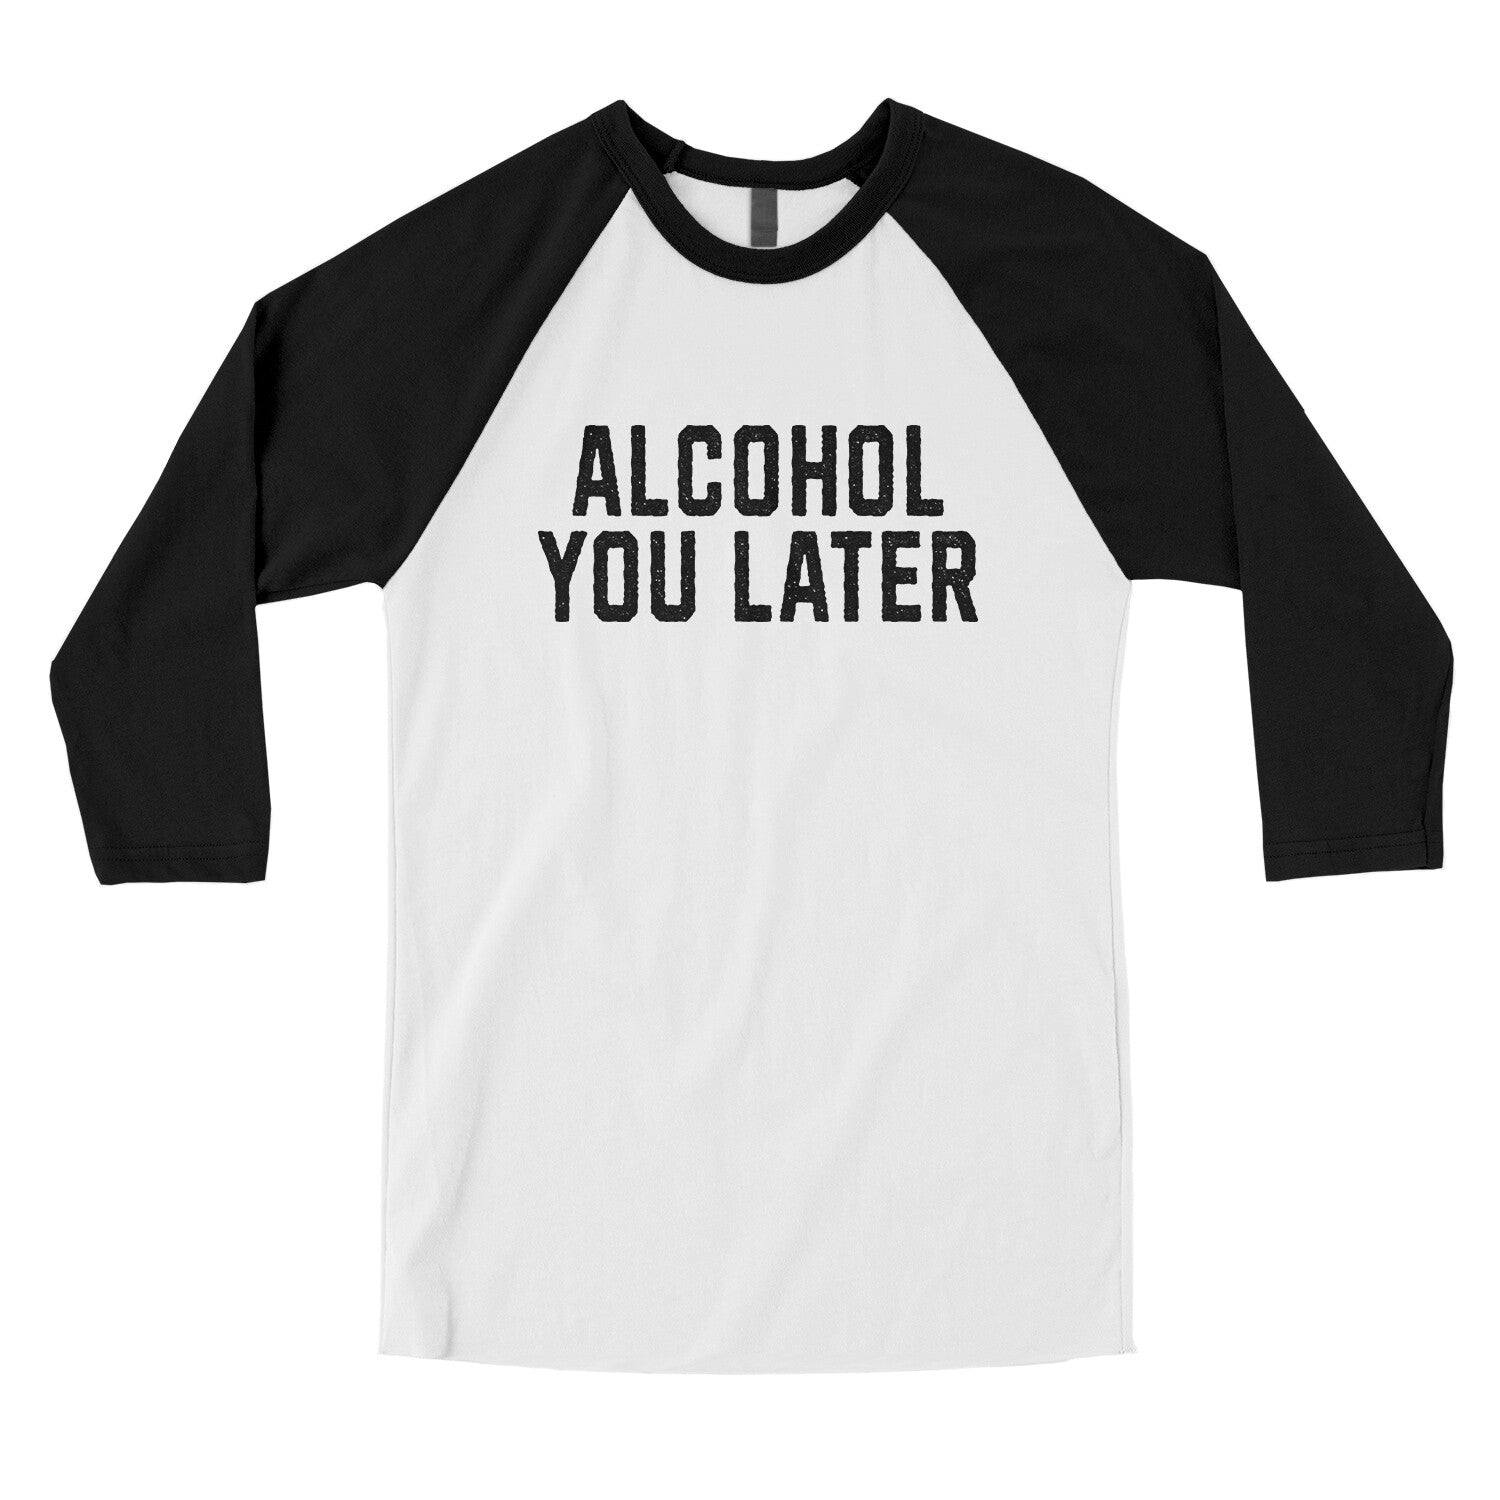 Alcohol You Later in White with Black Color